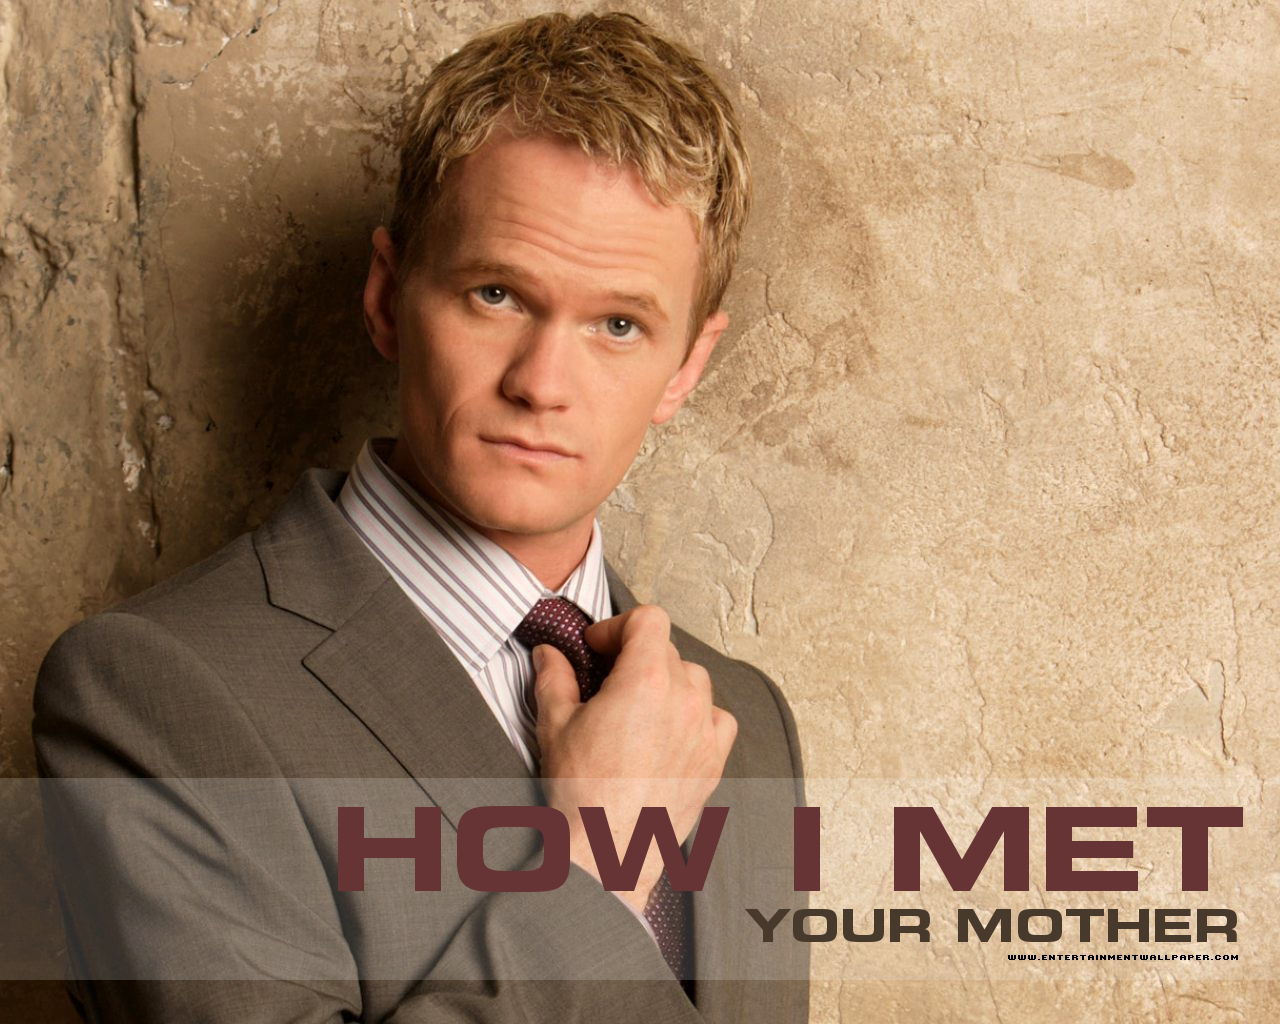 how i met your mother wallpaper,chin,forehead,suit,font,album cover